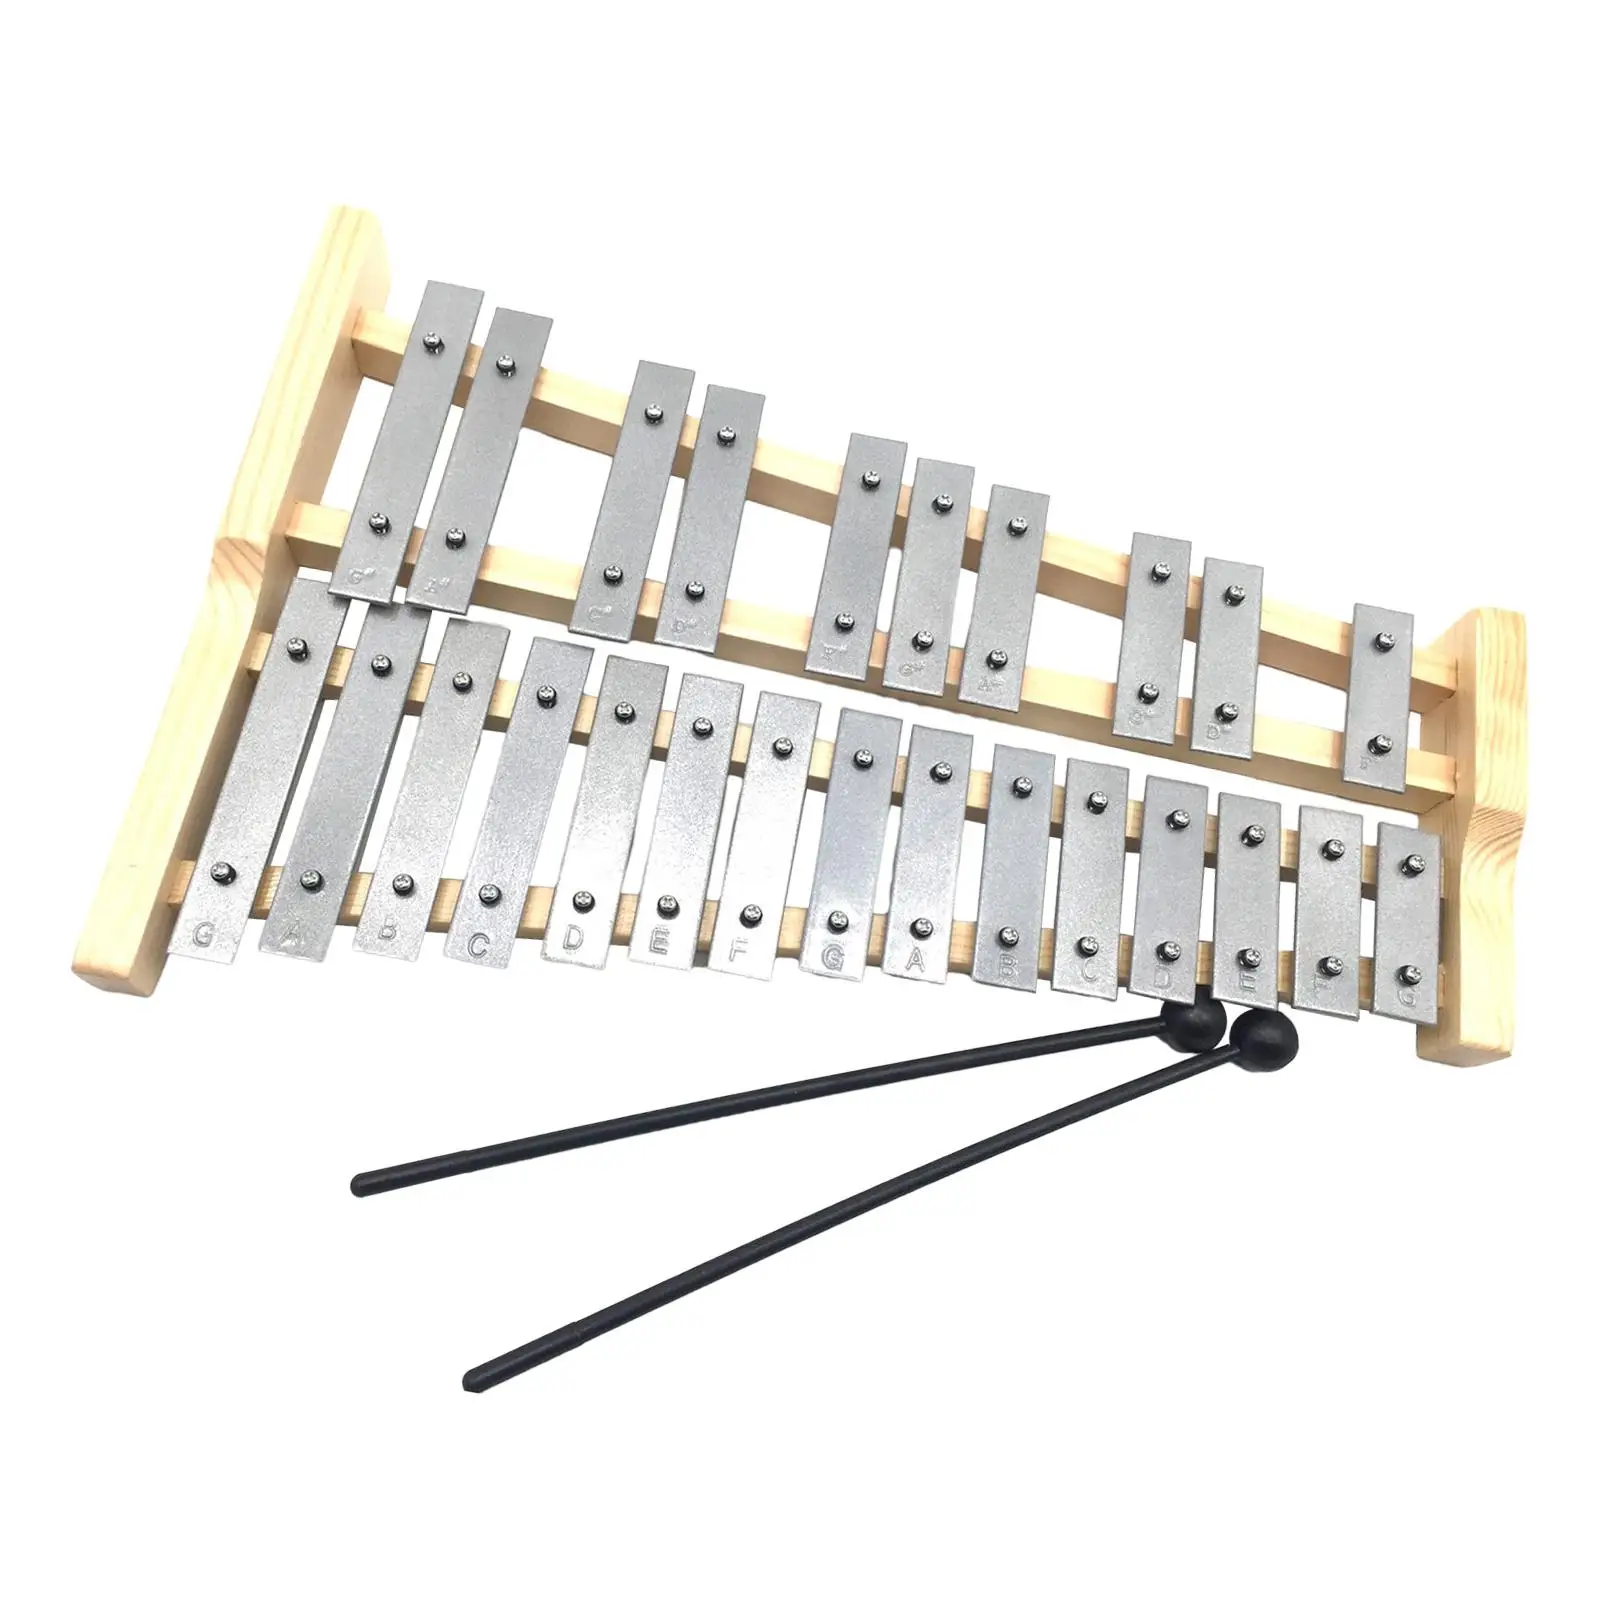 Aluminum Xylophone Wooden Frame Portable Professional Compact Gifts for Beginners 25 Note Glockenspiel Educational Percussion